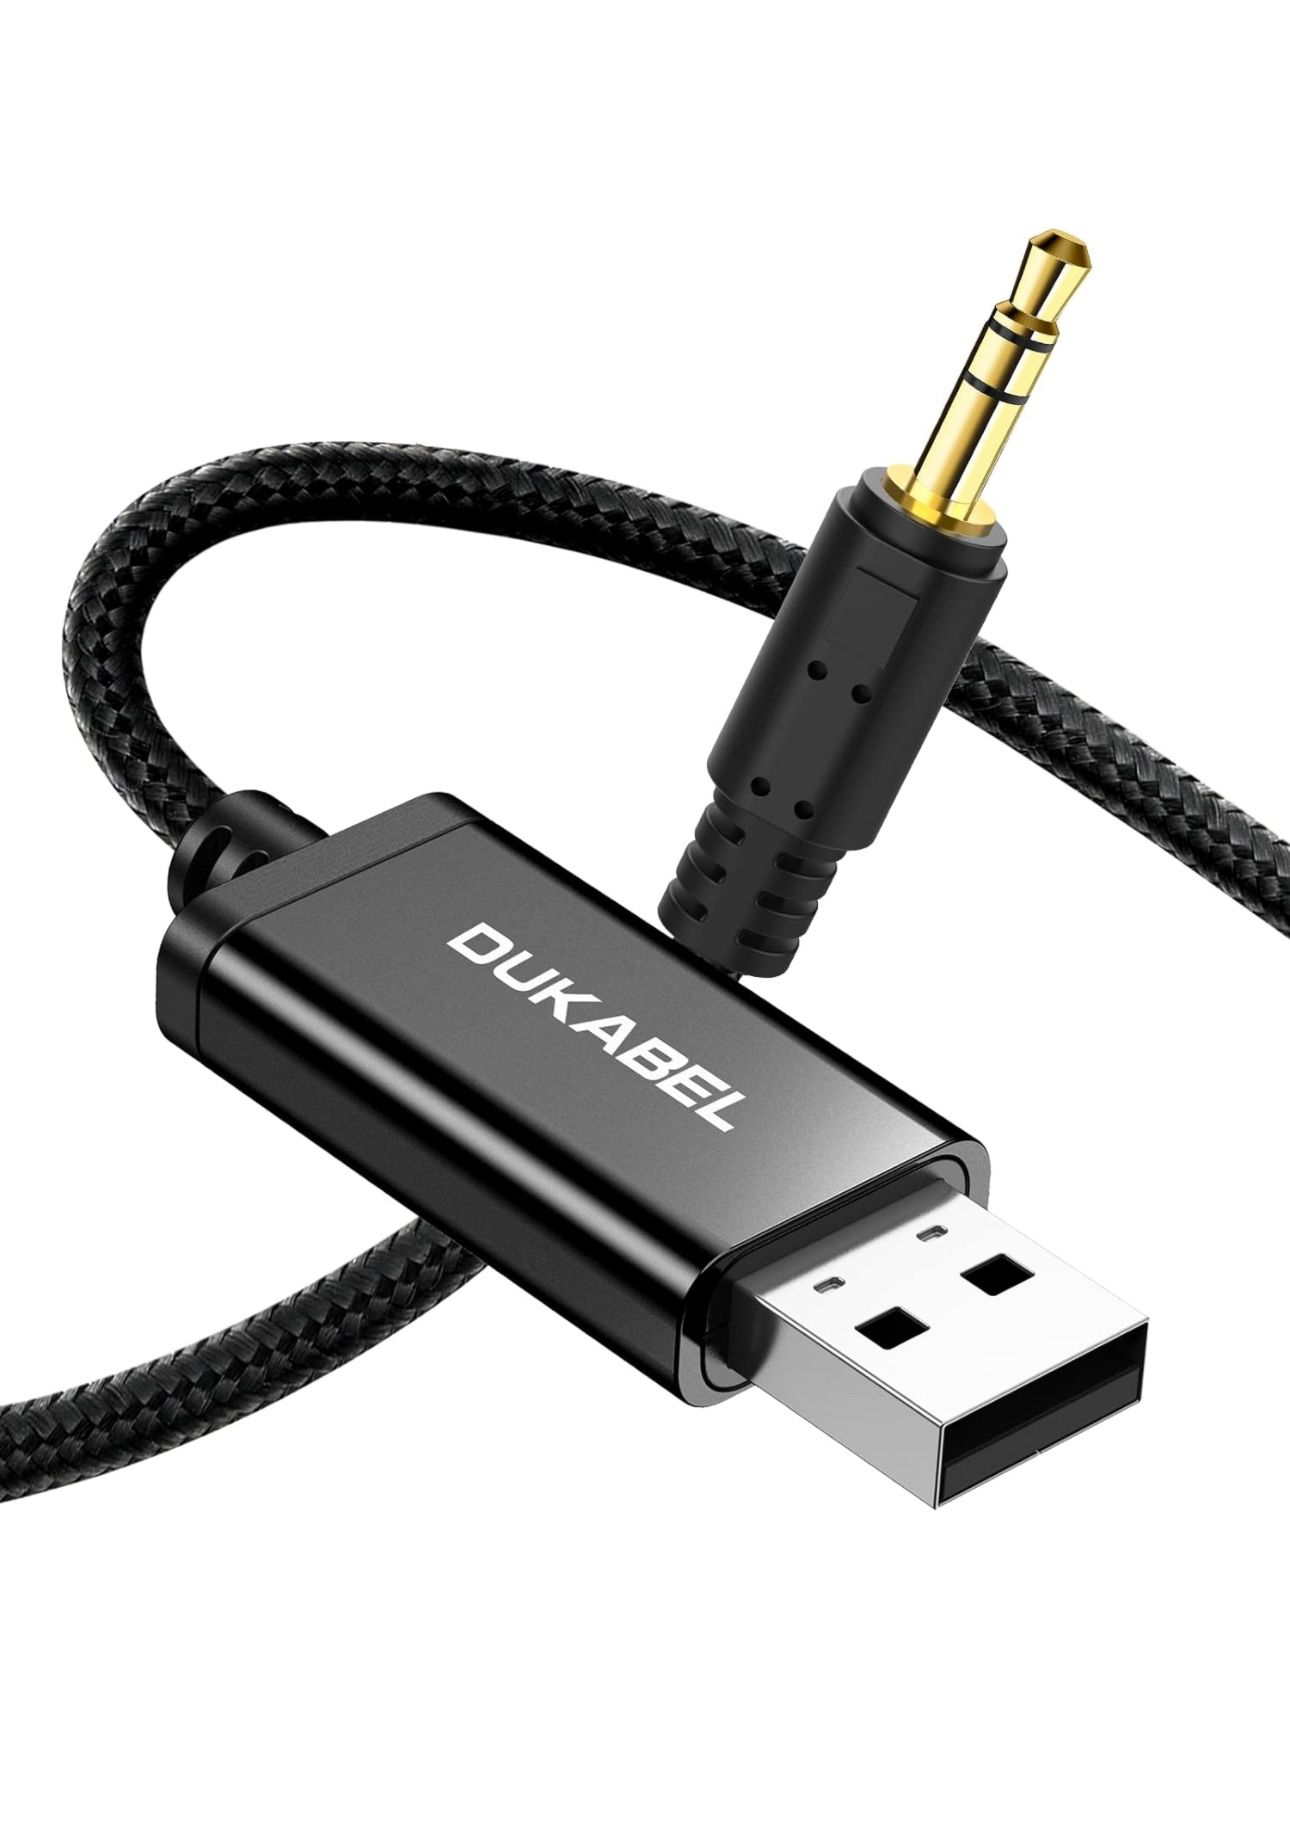 DUKABEL USB to 3.5mm Aux Cable, USB to 3.5mm Jack Cord for PC PS4 PS5 USB2.0 to 1/8’’ Male Auxiliary Audio Cable for Headphone Speaker(4FT/1.2Meter) D